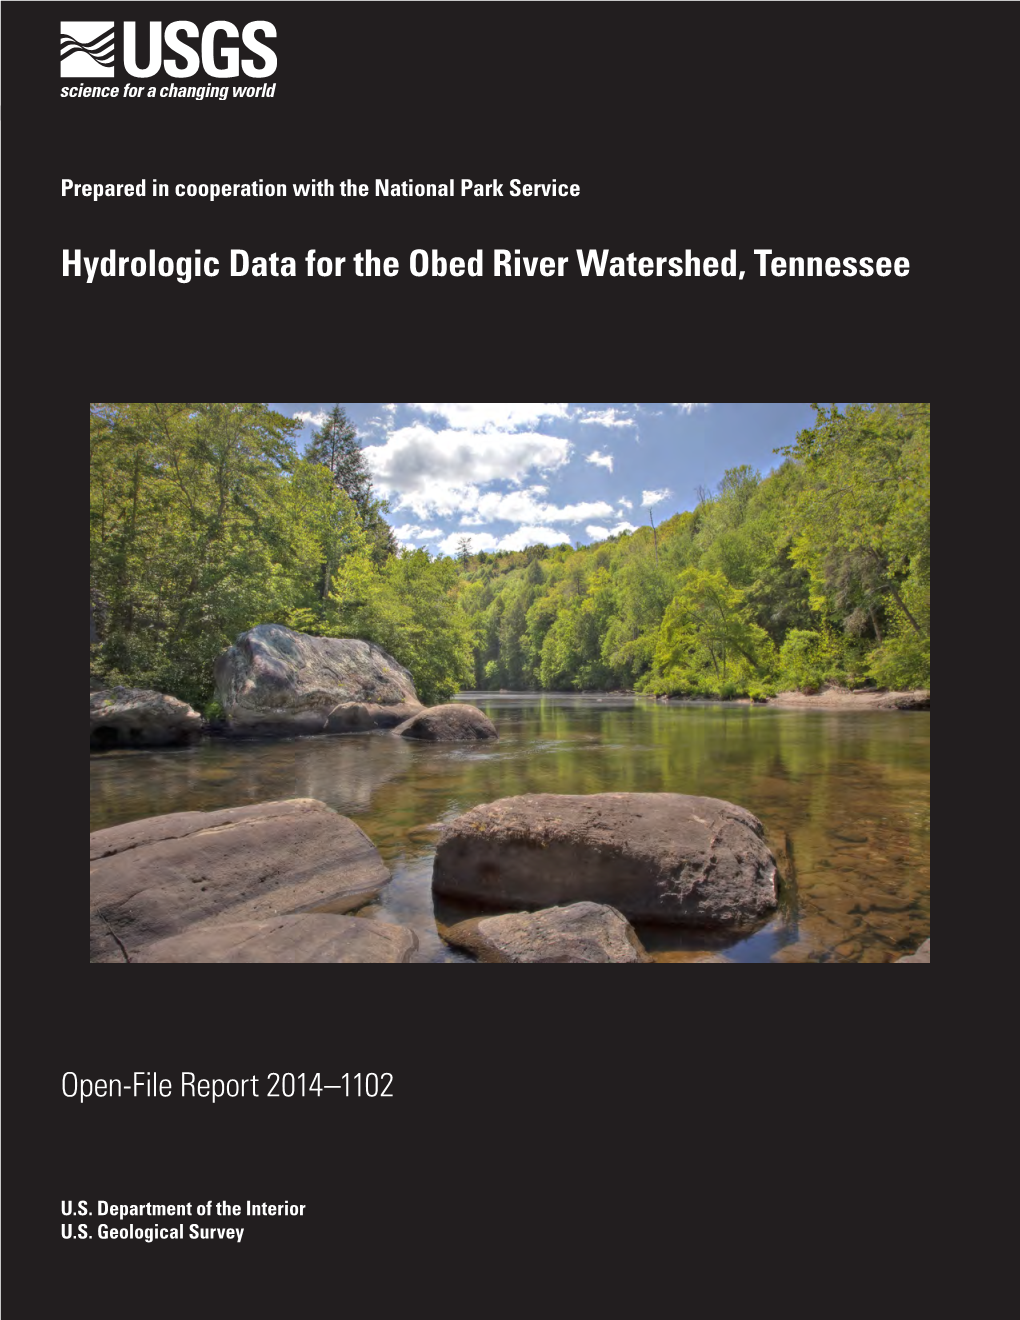 Hydrologic Data for the Obed River Watershed, Tennessee